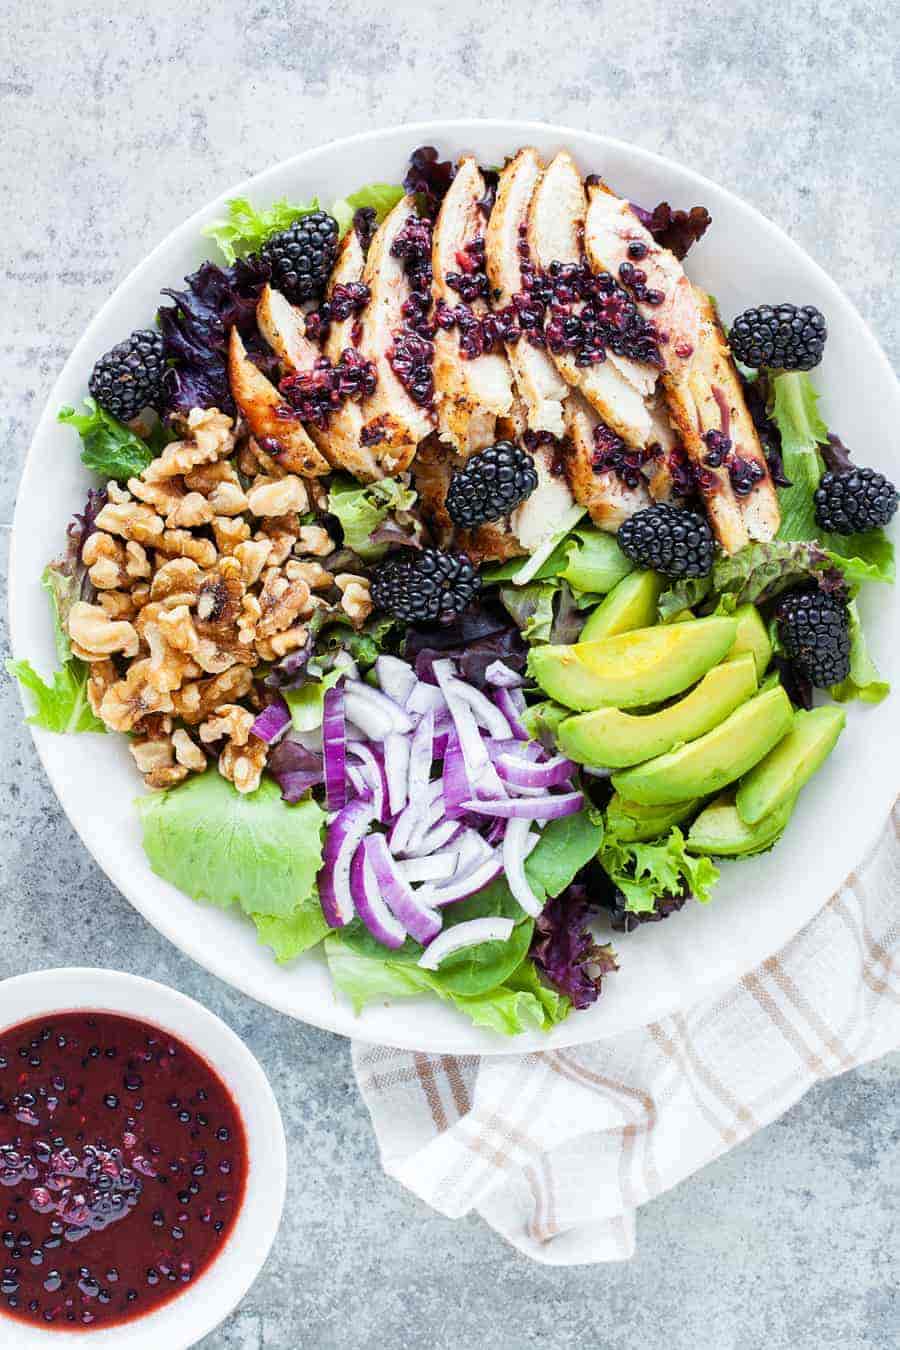 Incredibly delicious and healthy chicken salad with blackberries, avocado and walnuts